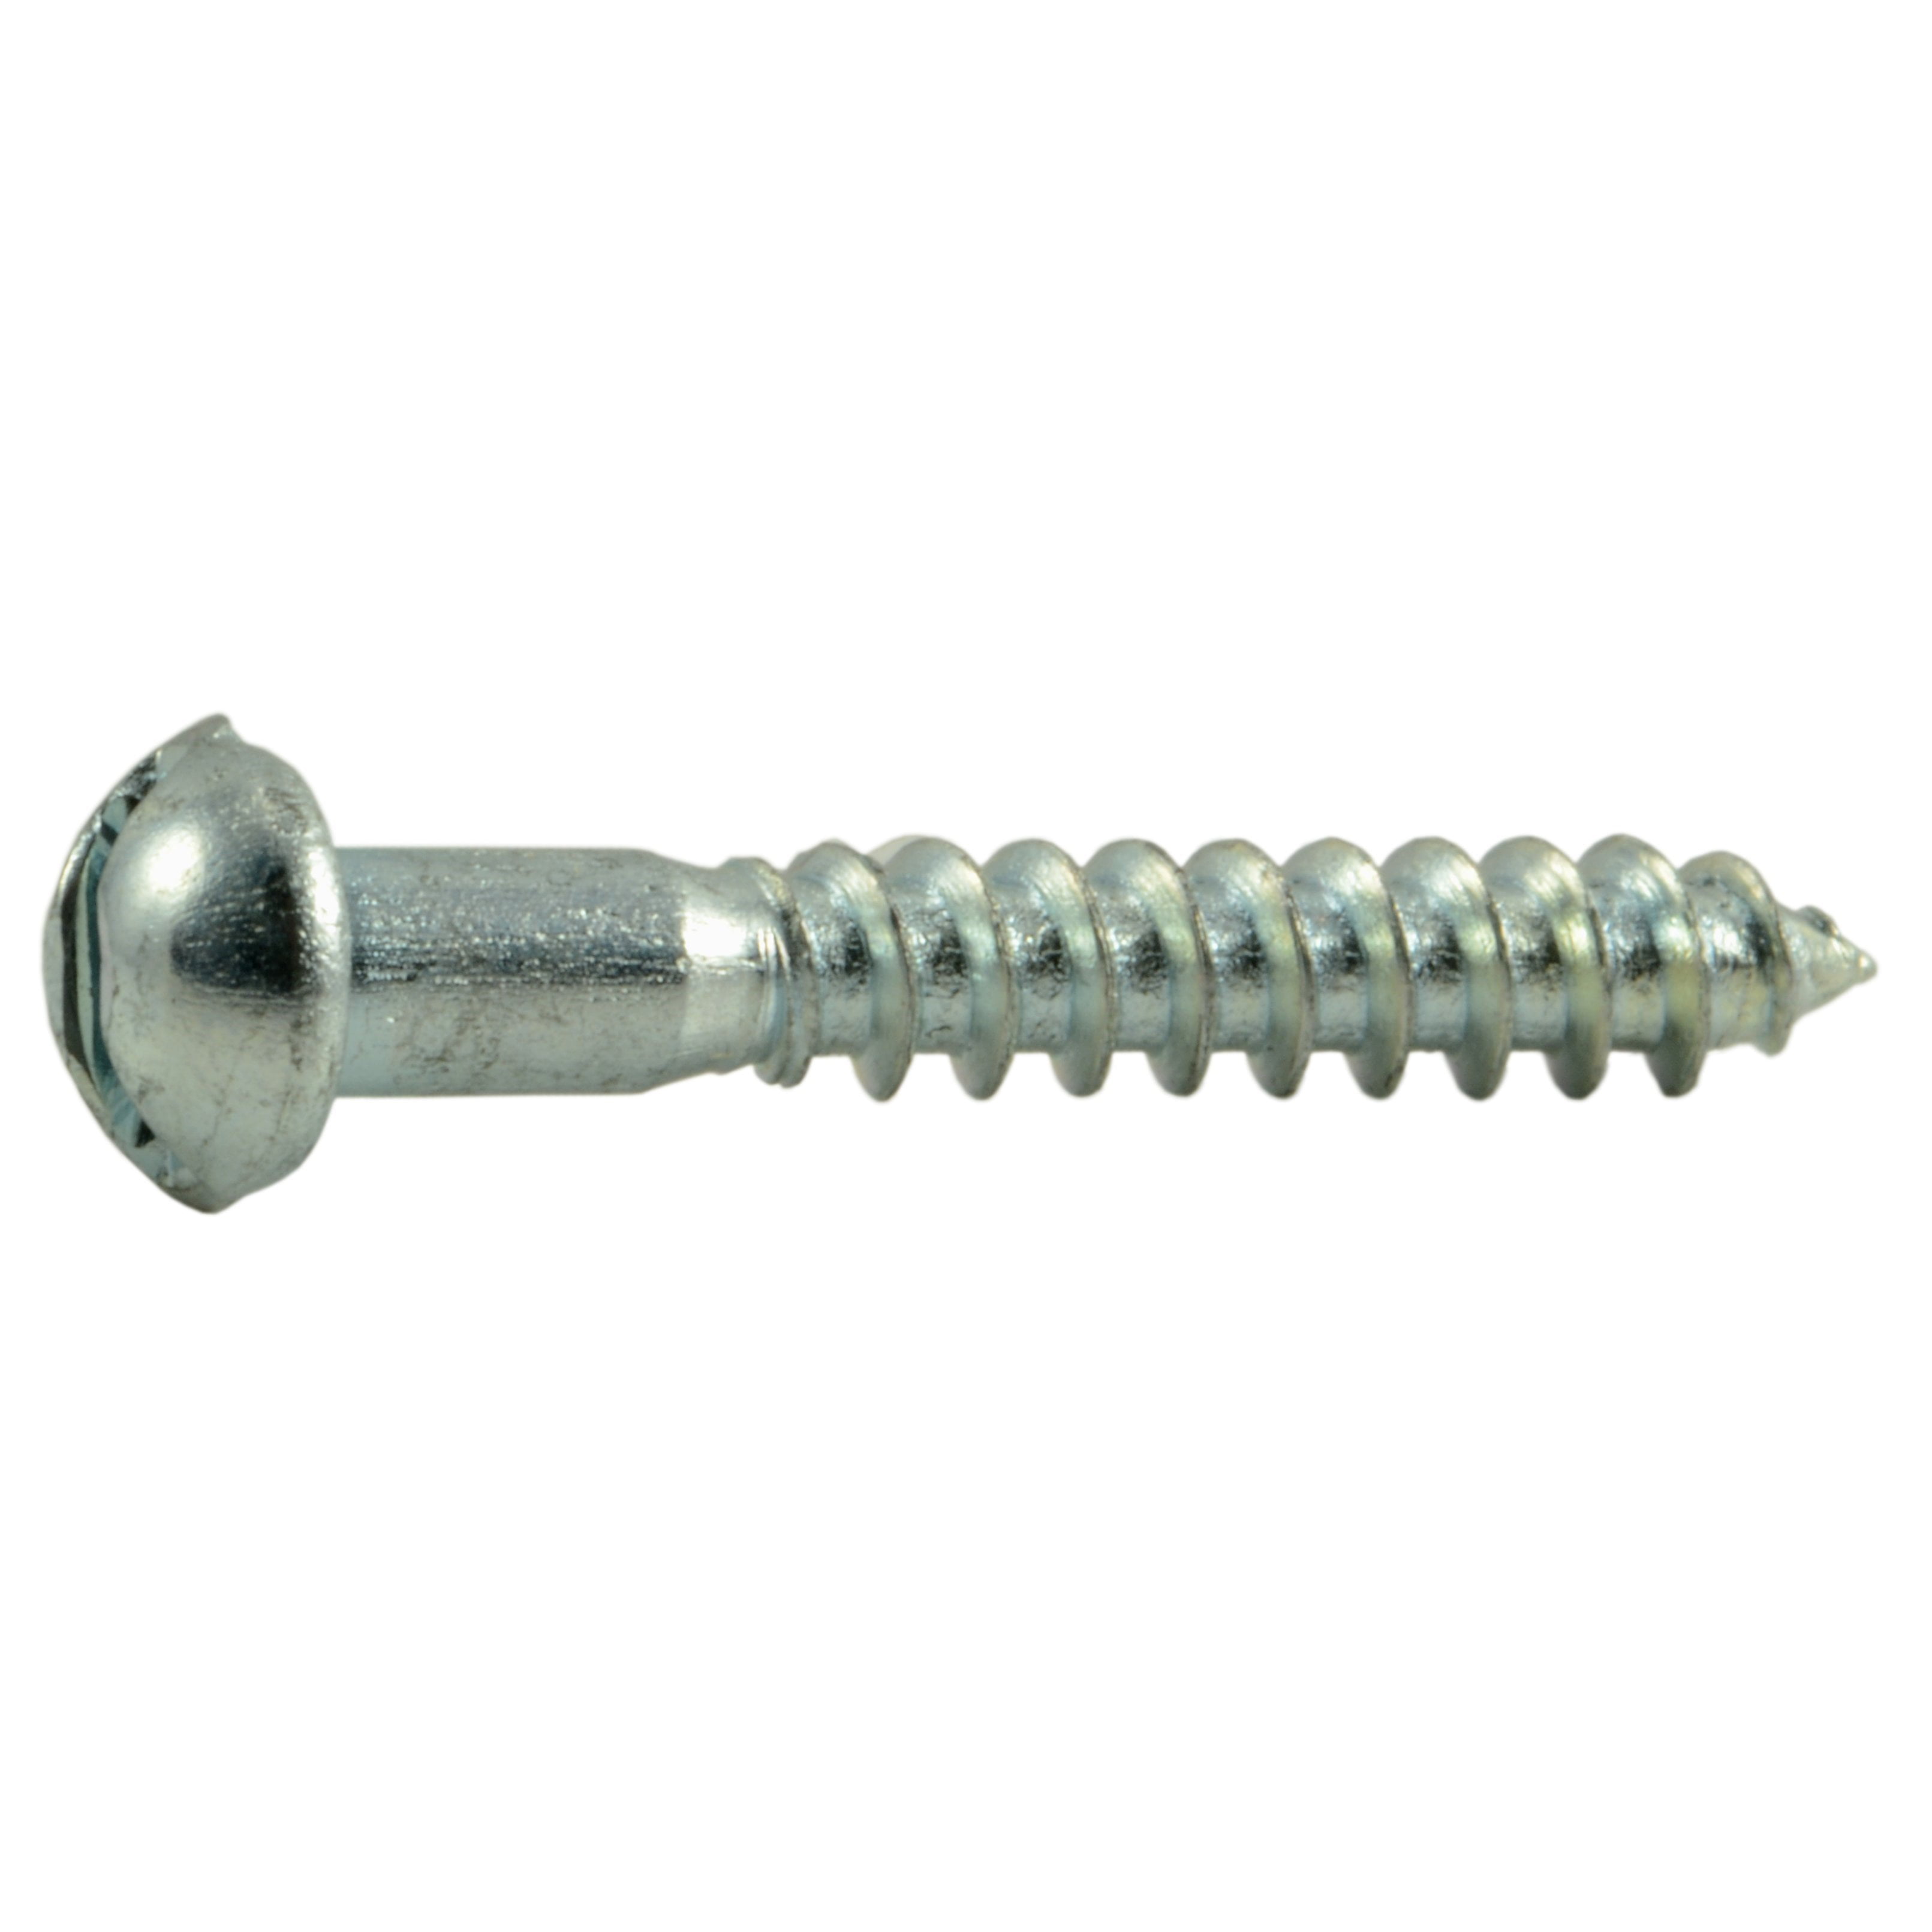 Flat Head Slotted Wood Screw Stainless Steel #4X3/8" Qty 25 